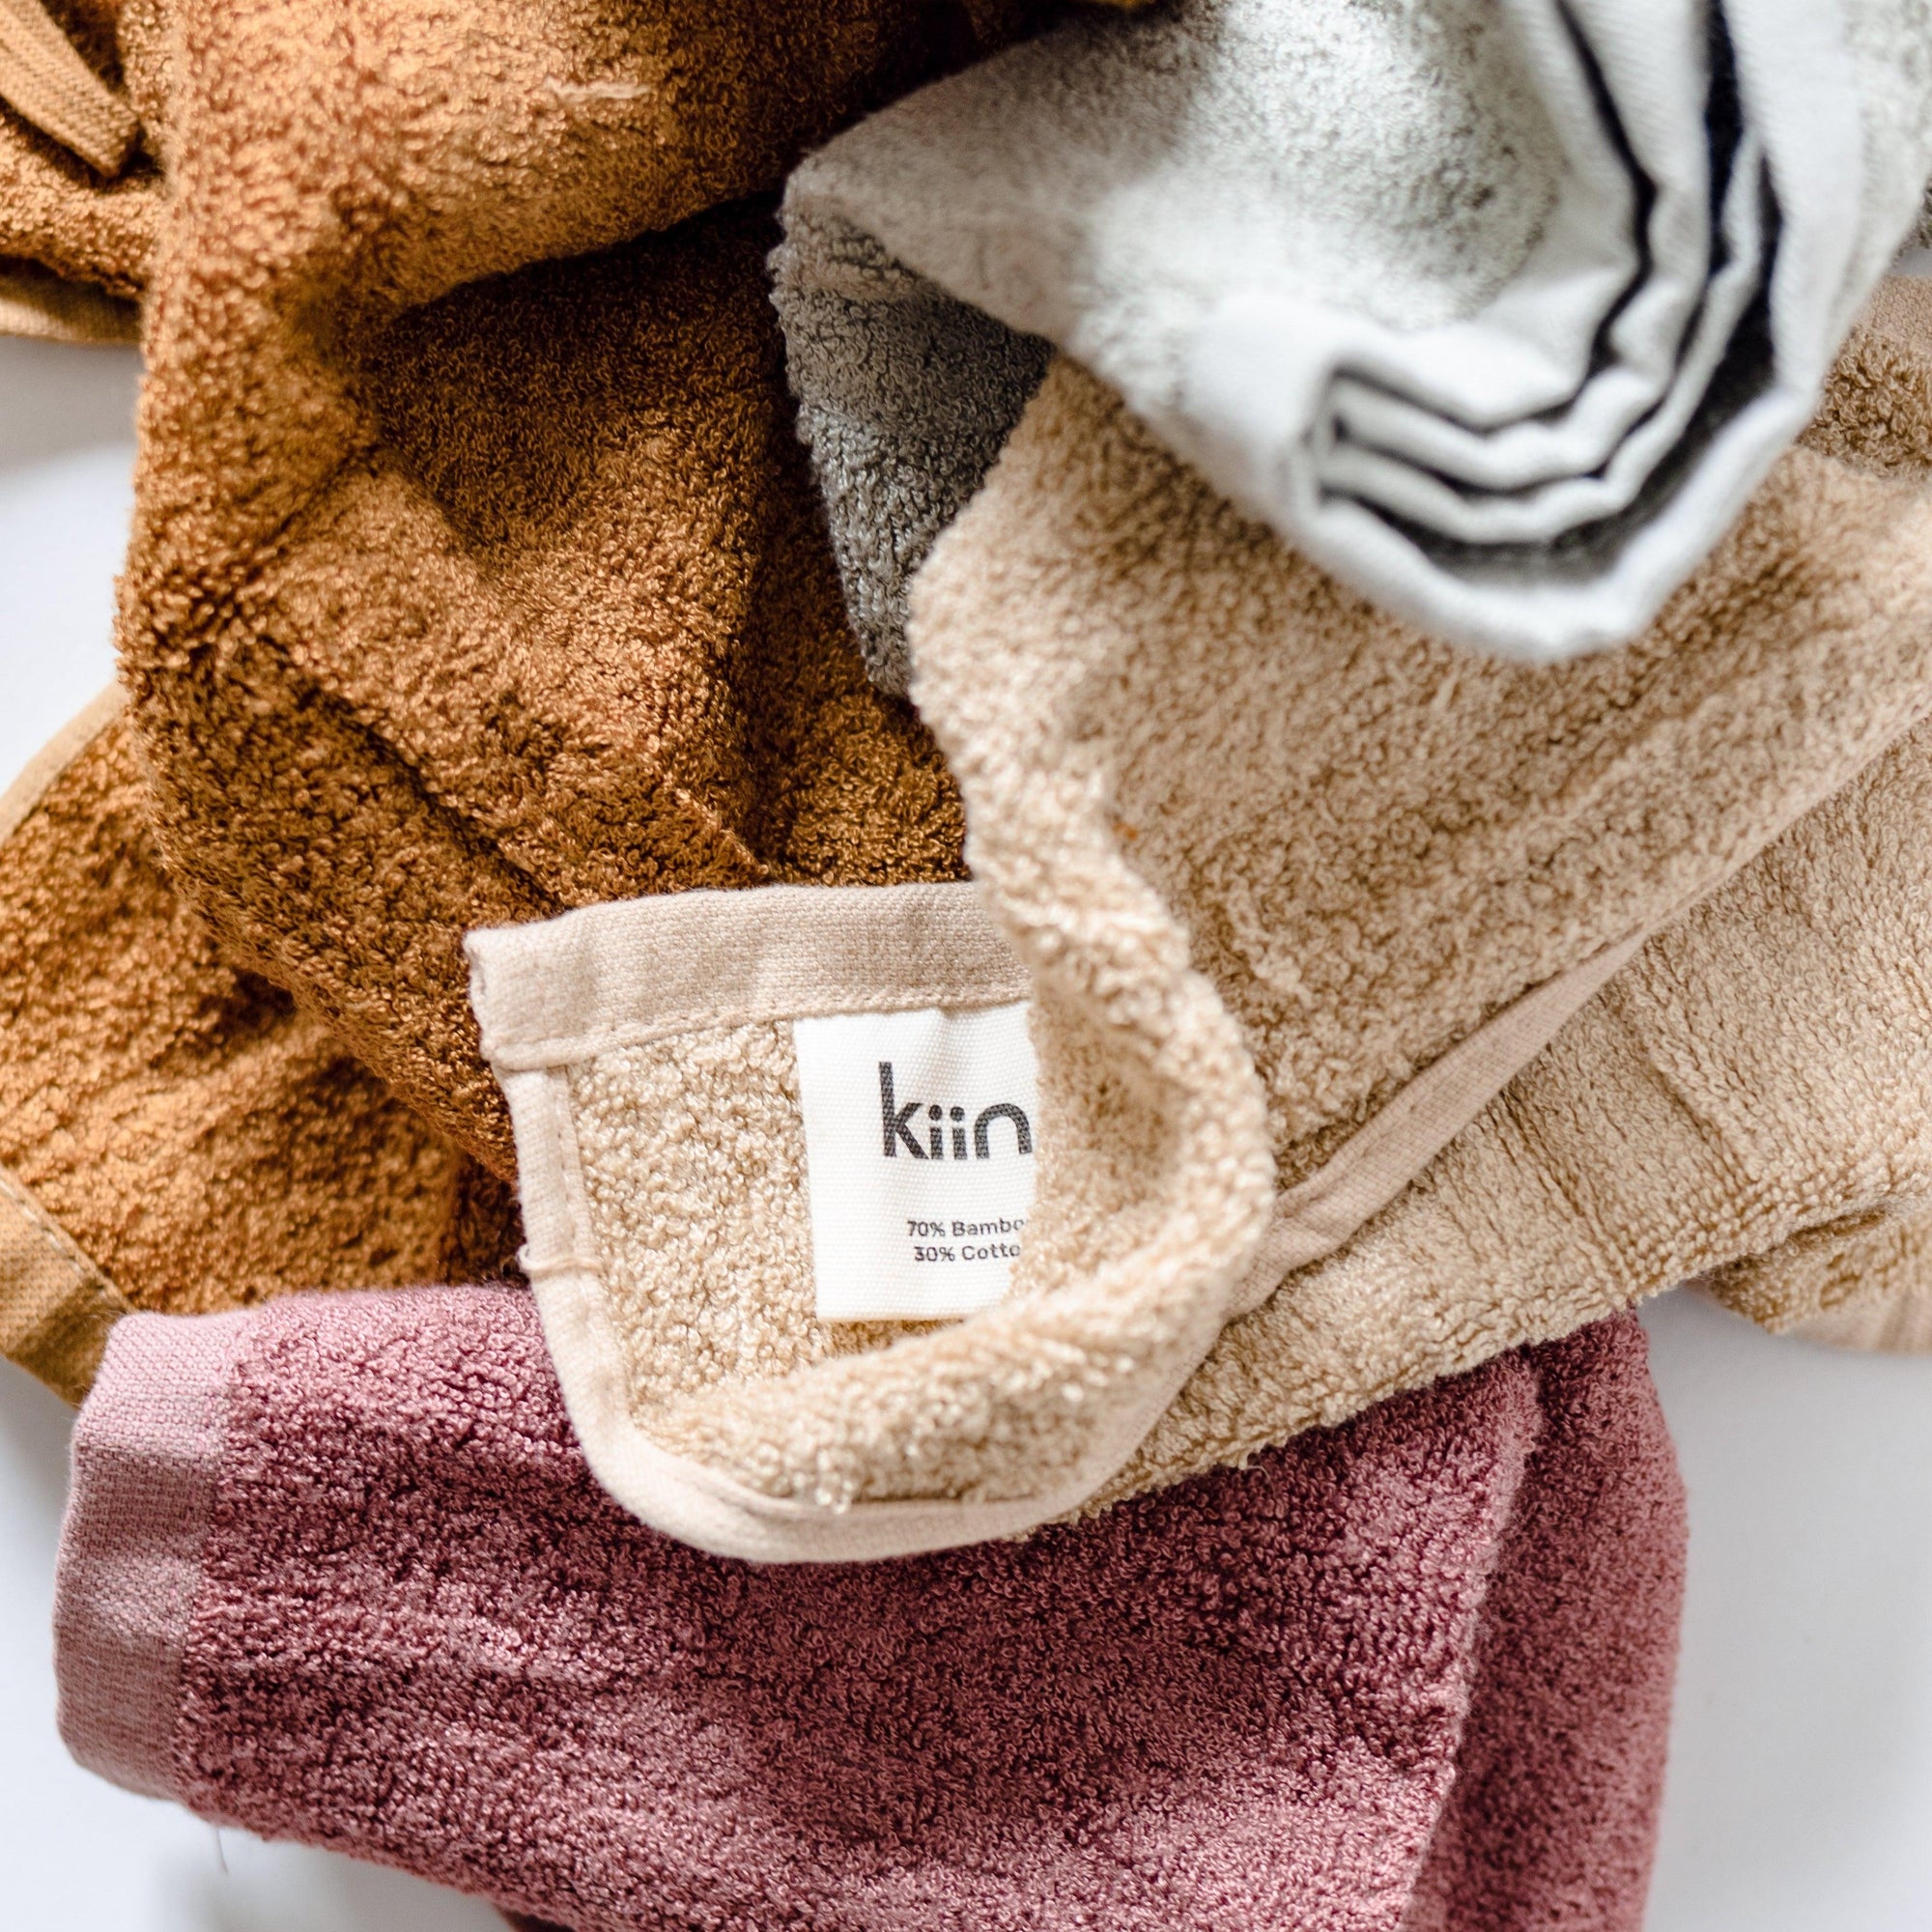 The Kiin Wash Cloth is the perfect accessory for bath & nappy change time. Designed with a hanging tab for easy hanging after use. Made in a super soft, and luxurious 500gsm cotton & bamboo blend, and measuring 25 x 25cm.